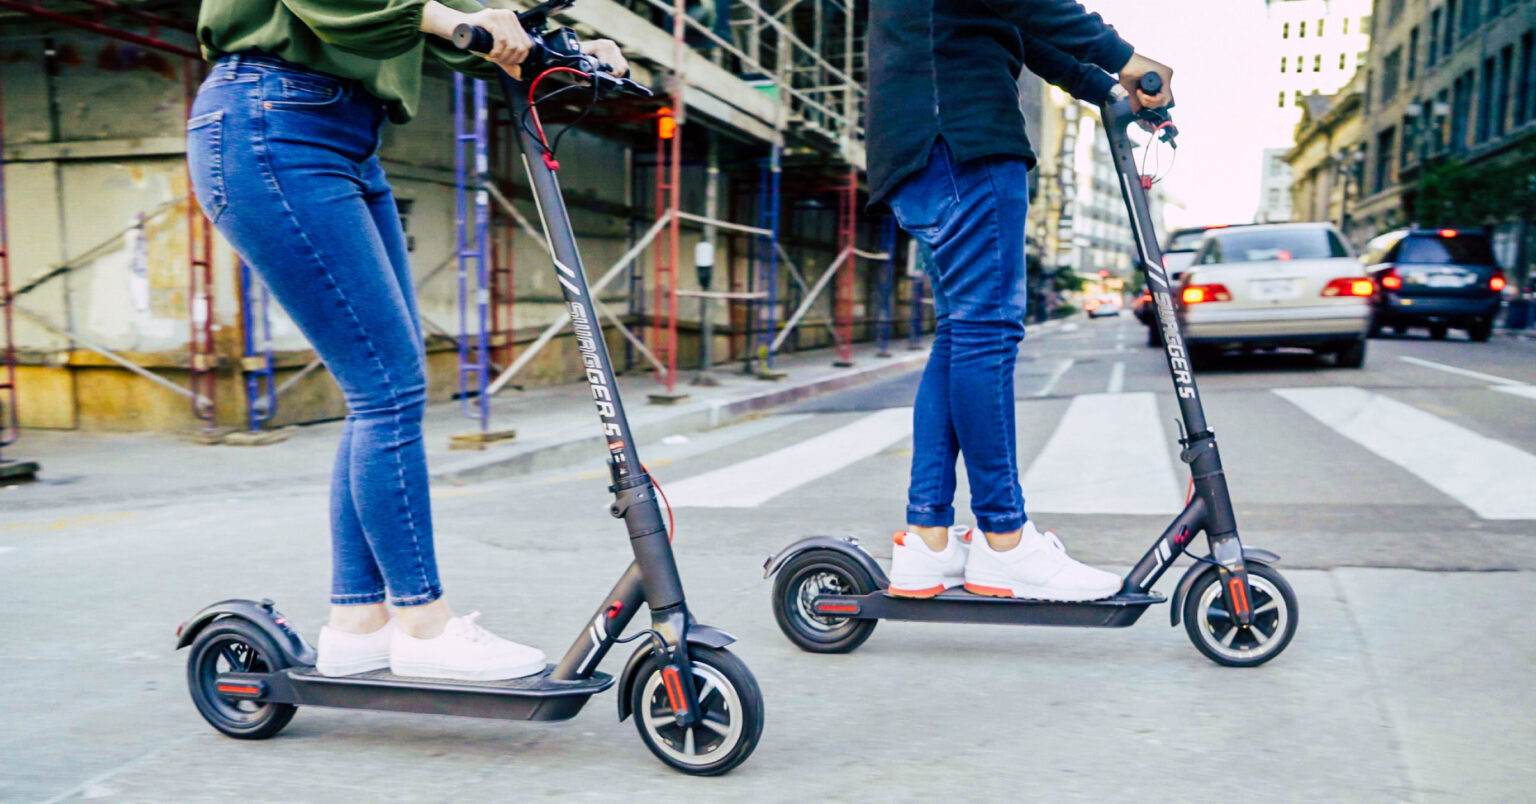 If you want to invest in your own electric scooter, there's a lot to consider. These tips will help you find the best electric scooter.